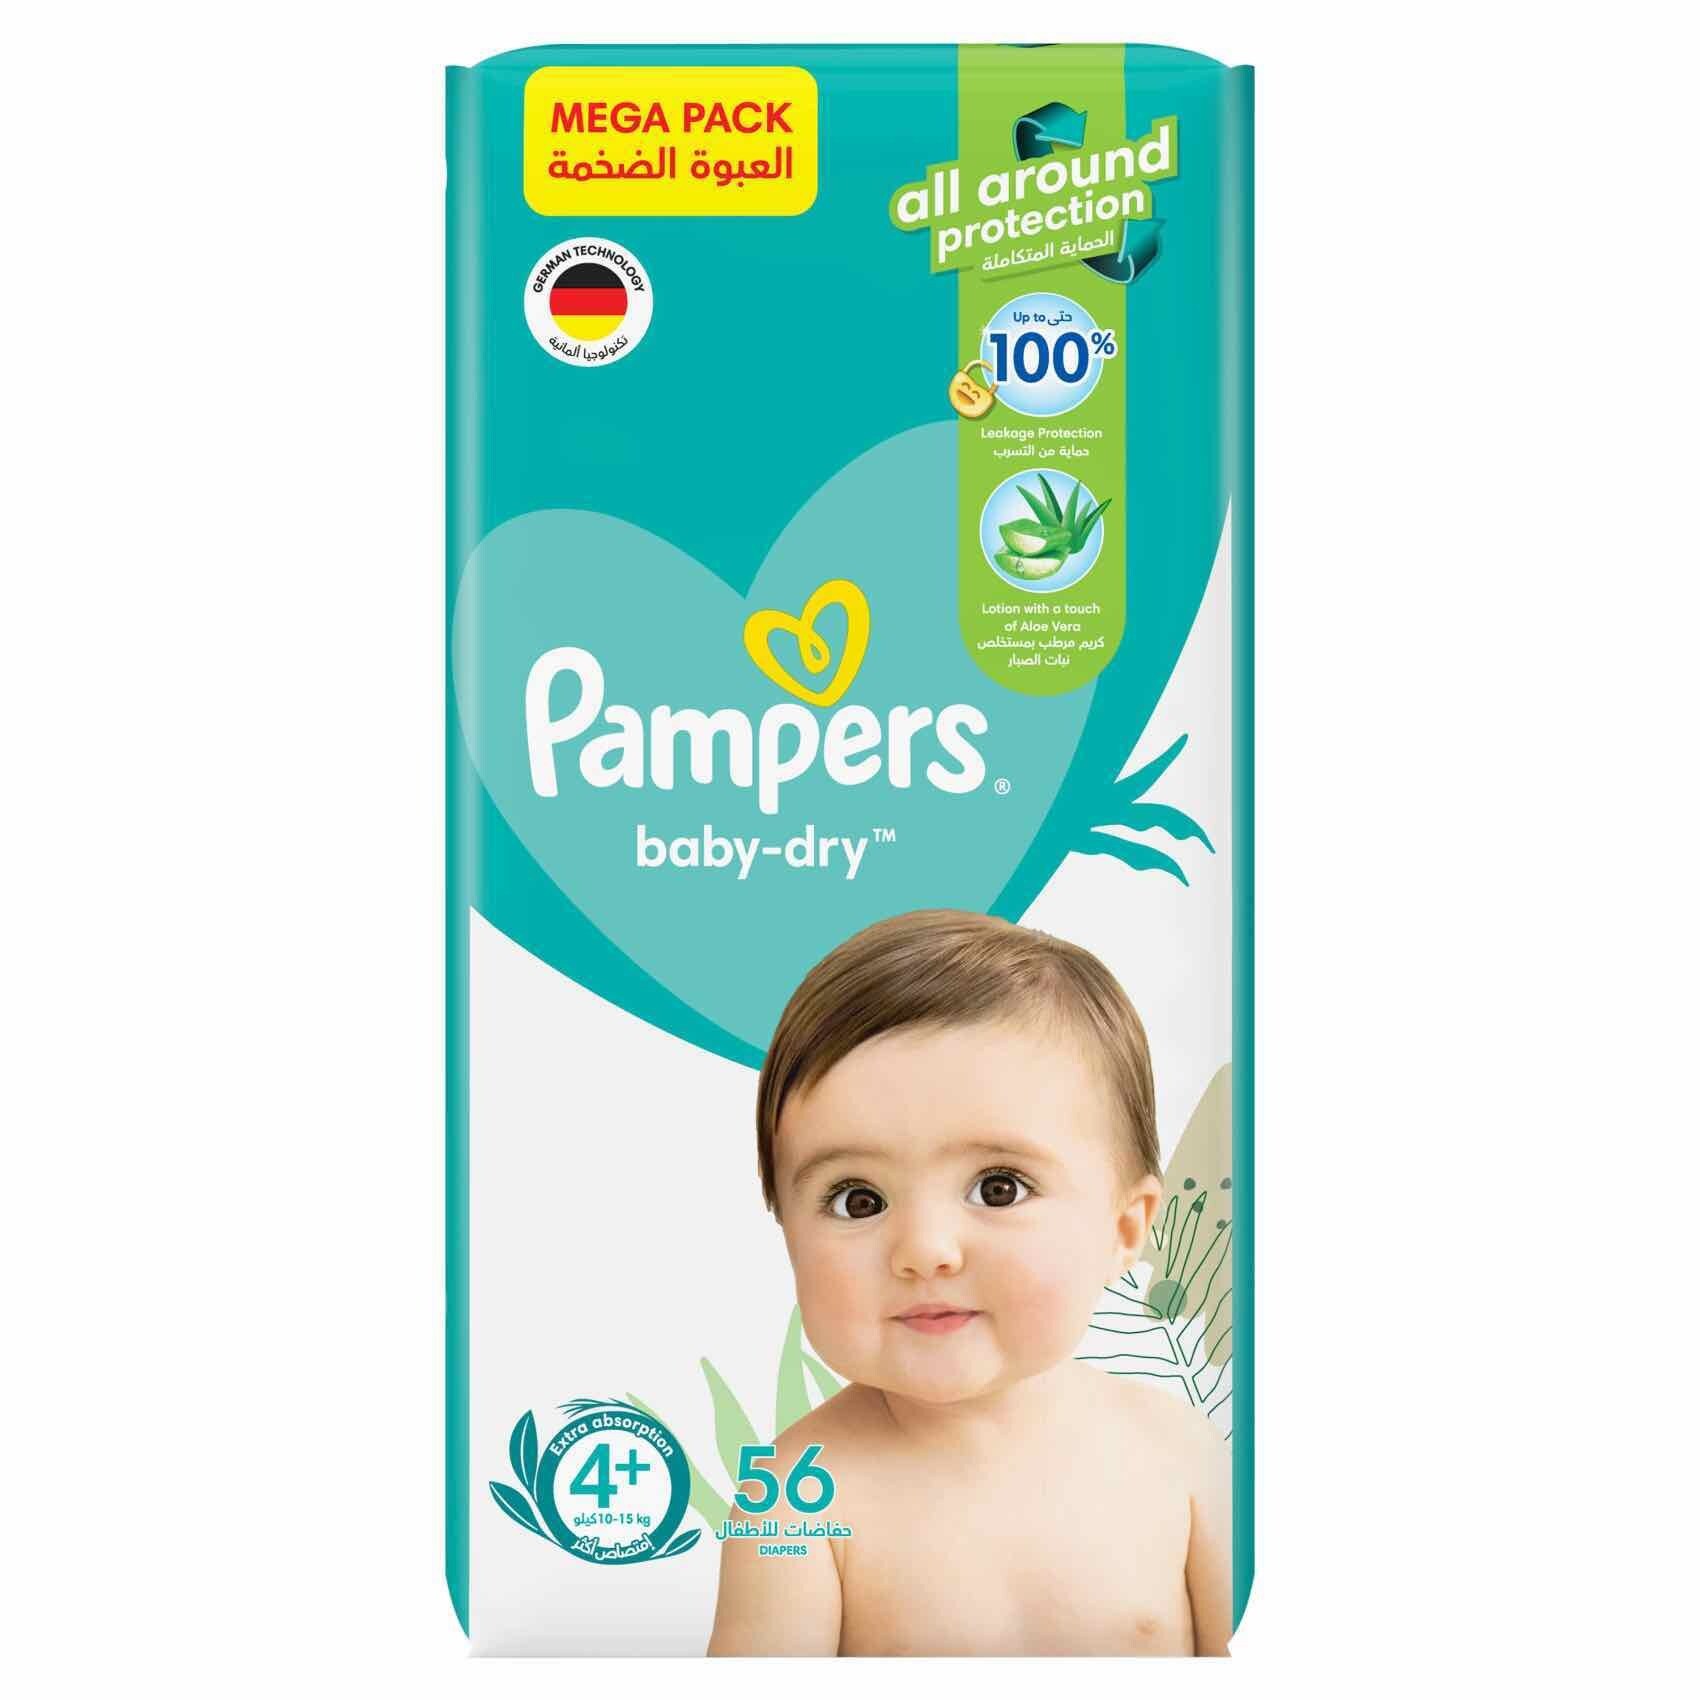 Pampers Baby-Dry Diapers with Aloe Vera Lotion, Size 4+,10-15 kg, 74 Diapers